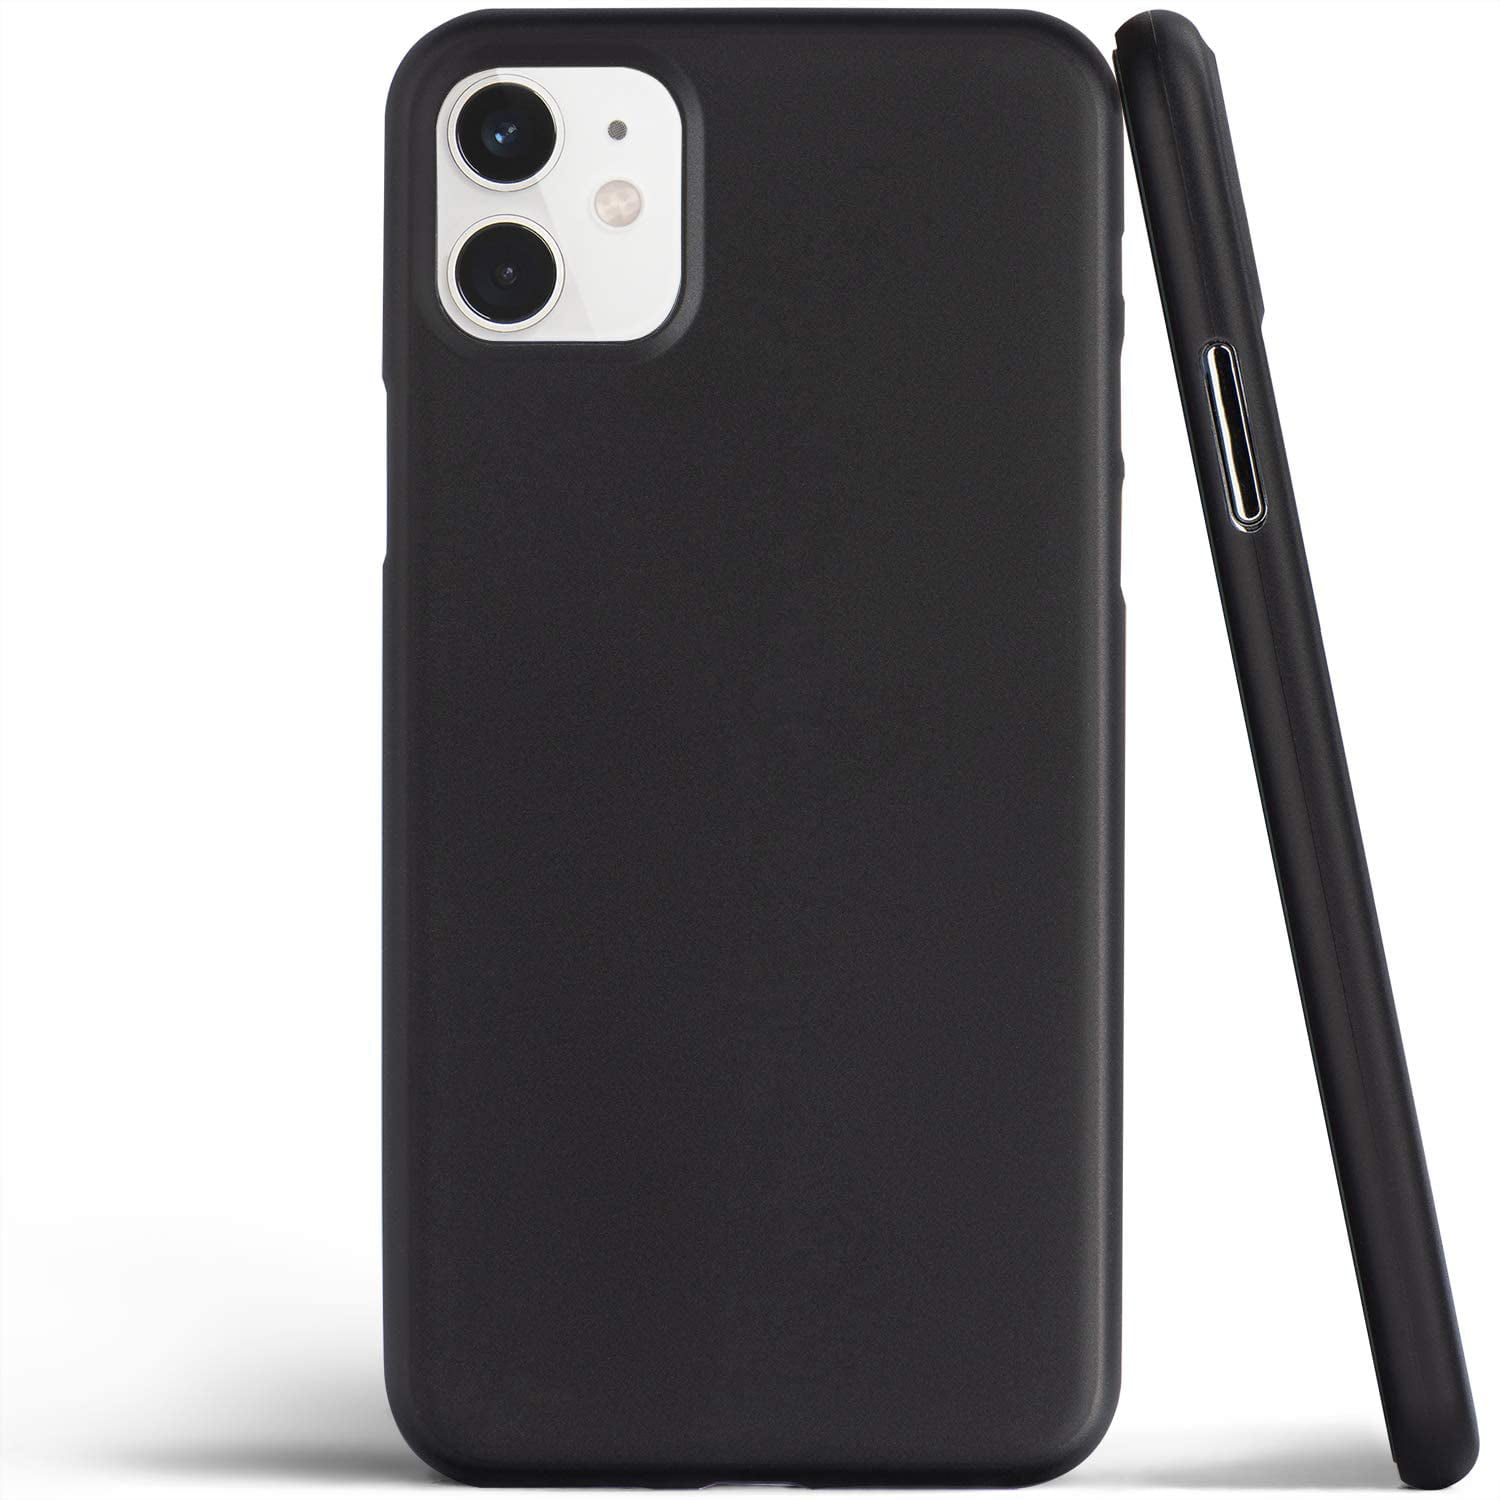 iphone 11 case thin - Online Discount Shop for Electronics, Apparel, Toys, Books, Games, Computers, Shoes, Jewelry, Watches, Baby Products, Sports &amp; Outdoors, Office Products, Bed &amp; Bath, Furniture, Tools, Hardware, Automotive